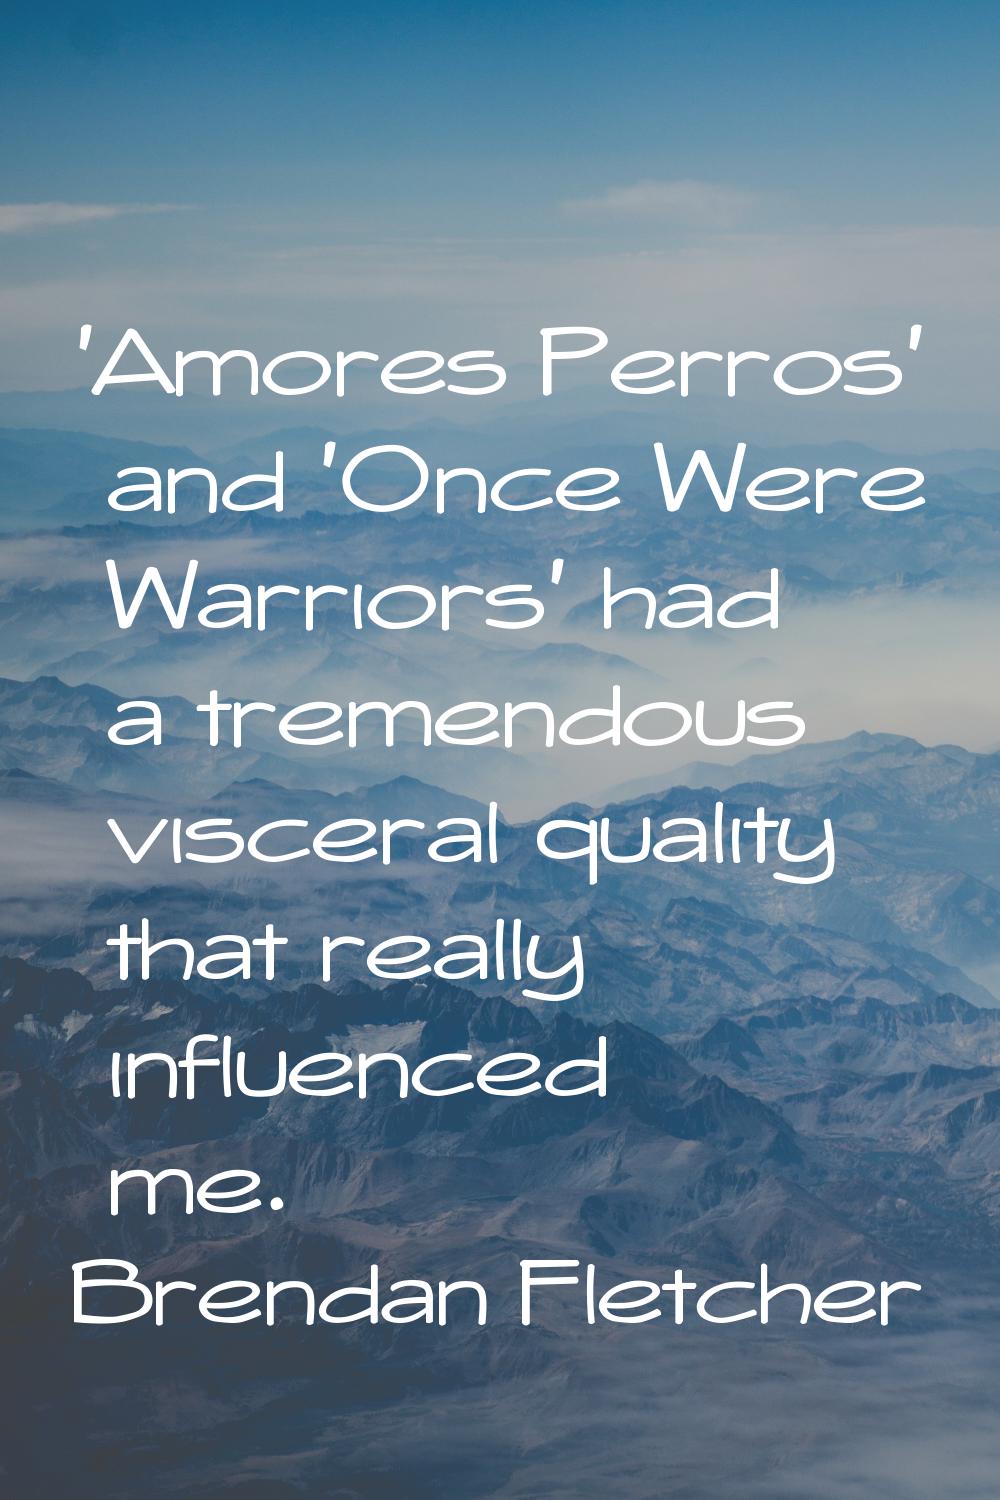 'Amores Perros' and 'Once Were Warriors' had a tremendous visceral quality that really influenced m